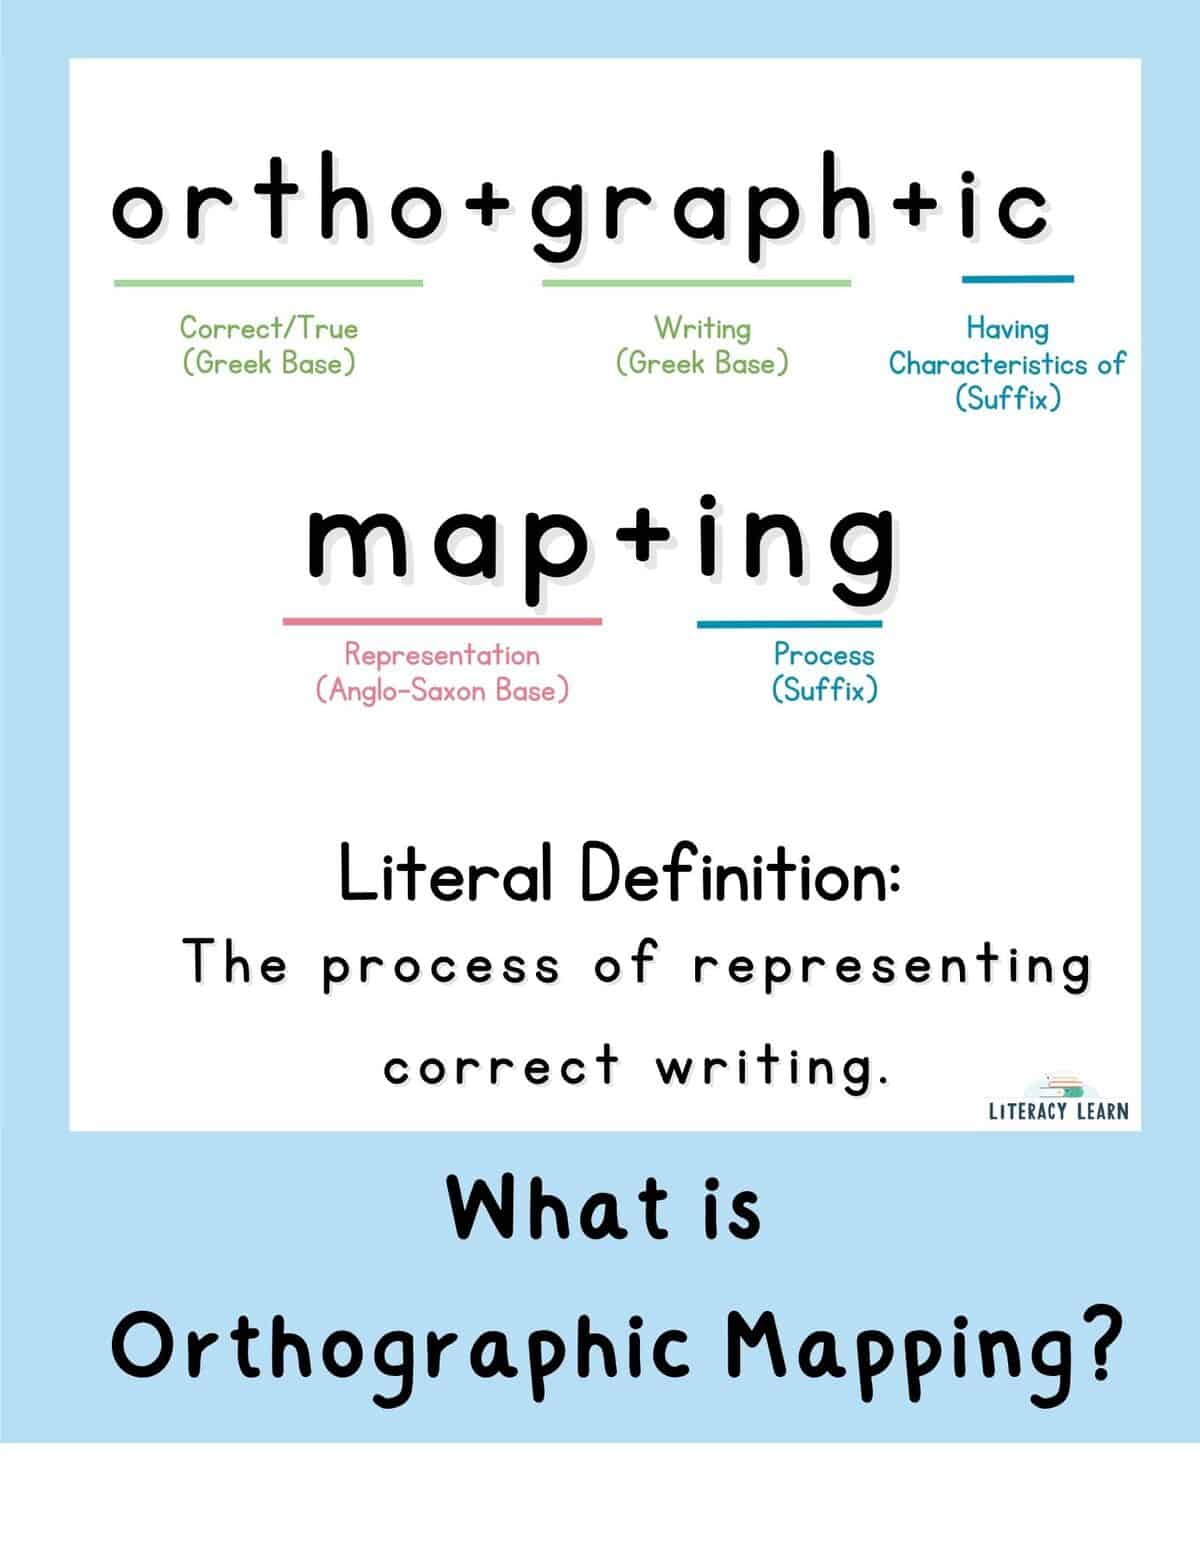 Graphic of a word sum for 'orthographic mapping' meaning 'the process of representing correct writing.'